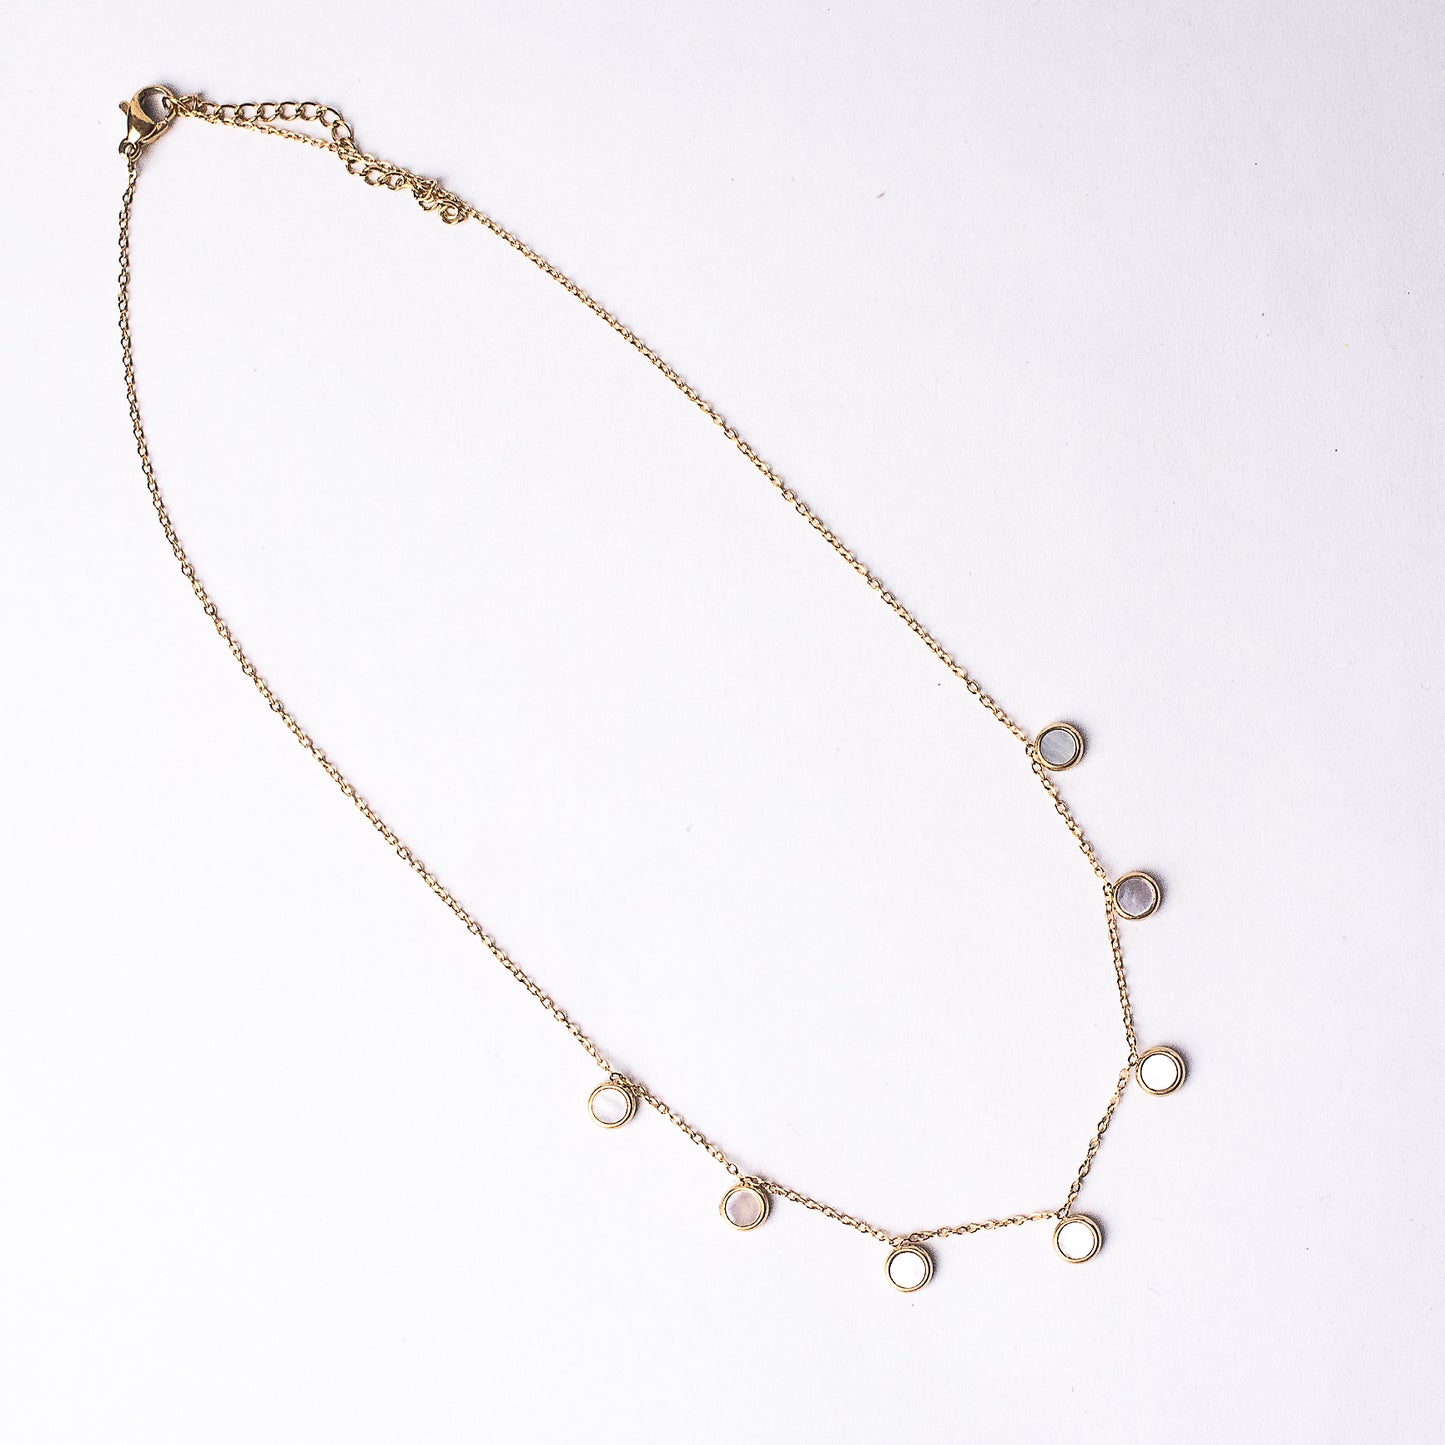 Bailey Charm Necklace